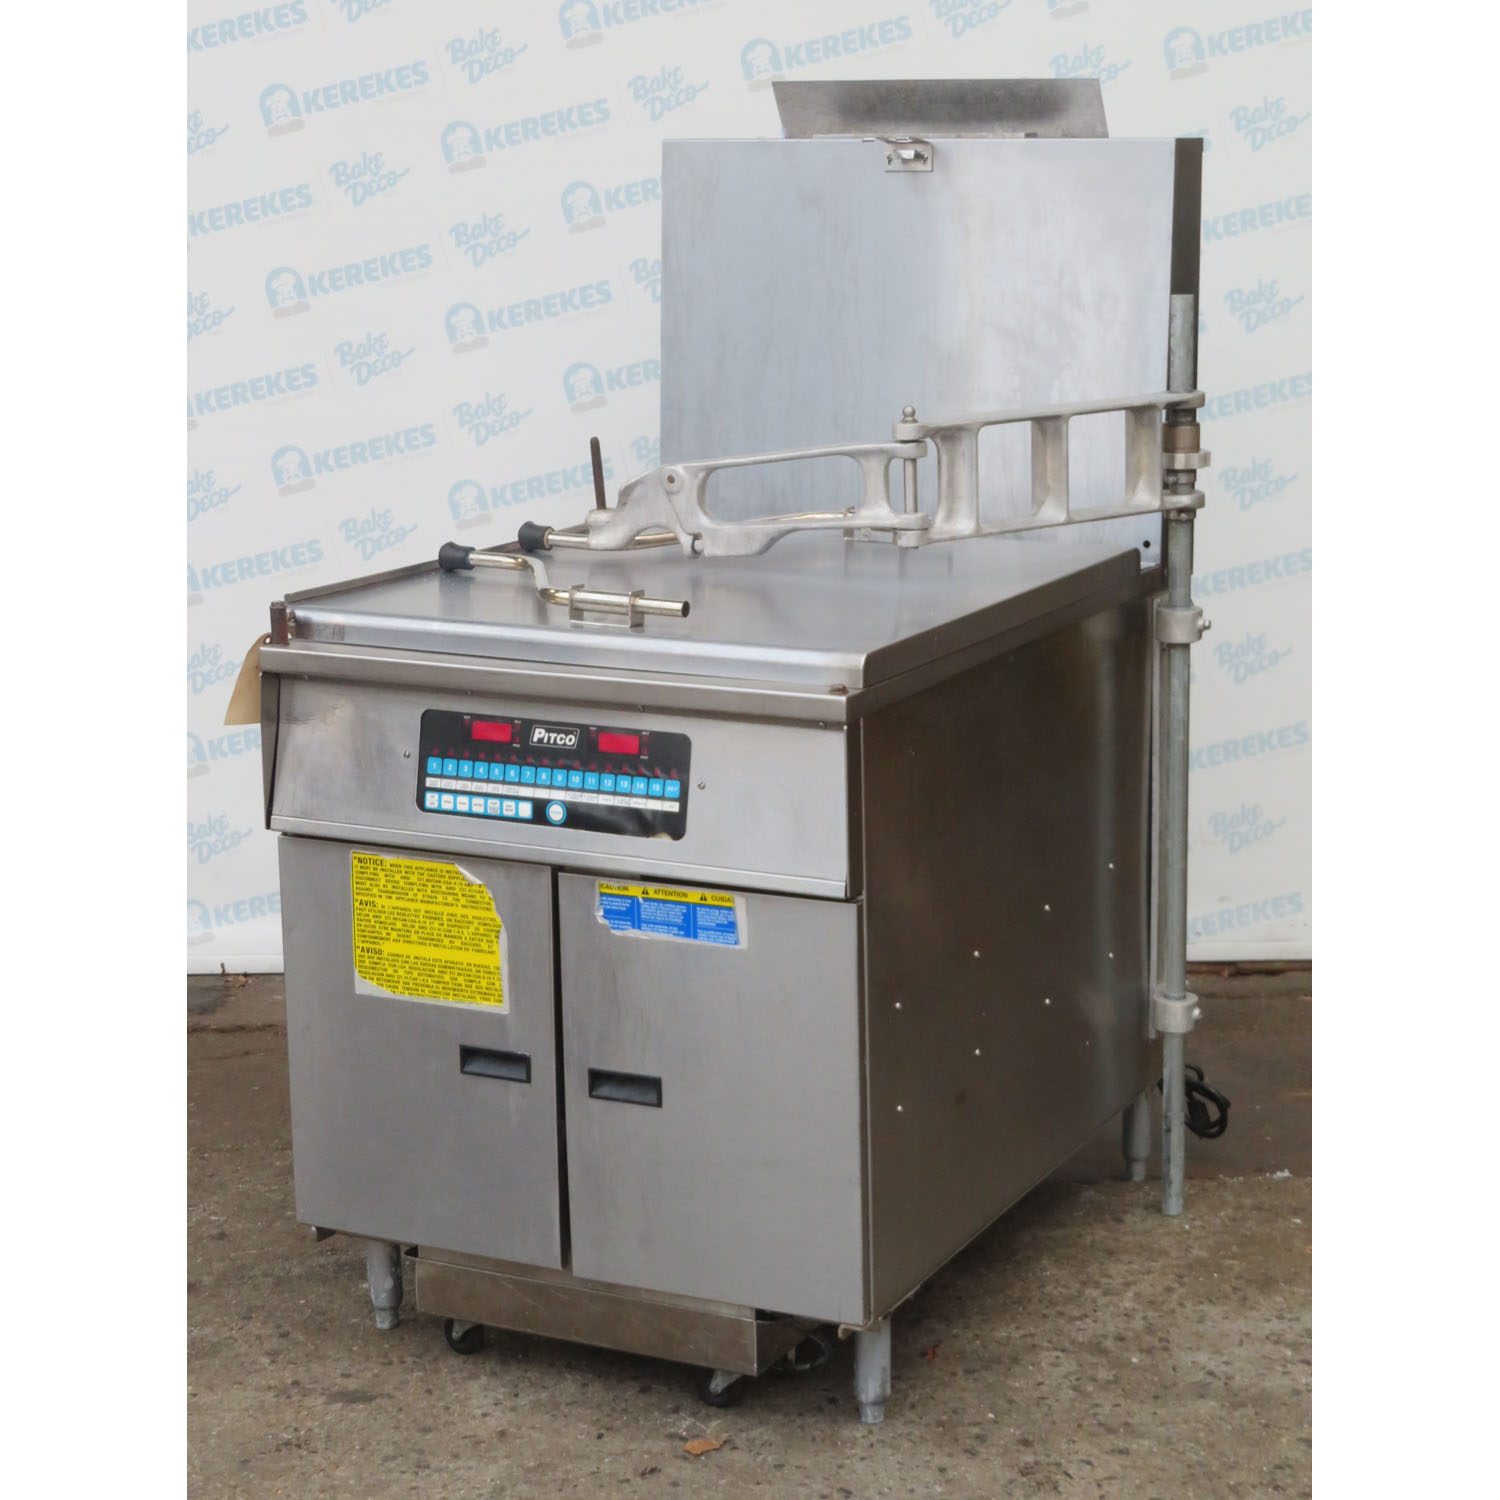 Pitco DD24RUFM Gas Donut Fryer with Oil Filter, Used Great Condition image 3